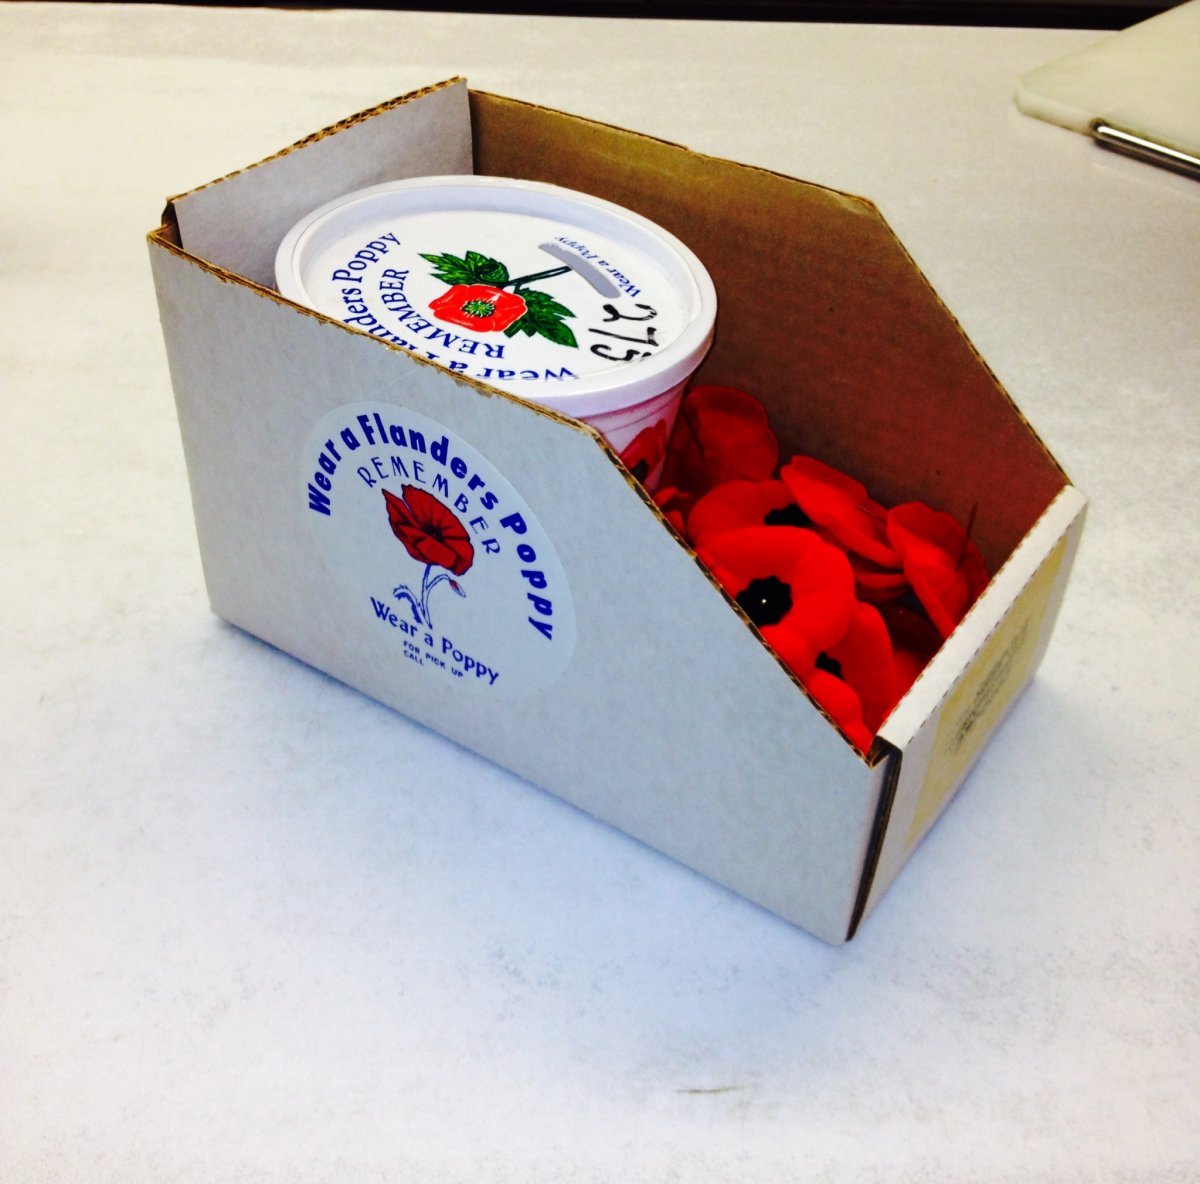 A man has been charged in connection to three Lethbridge poppy box thefts.